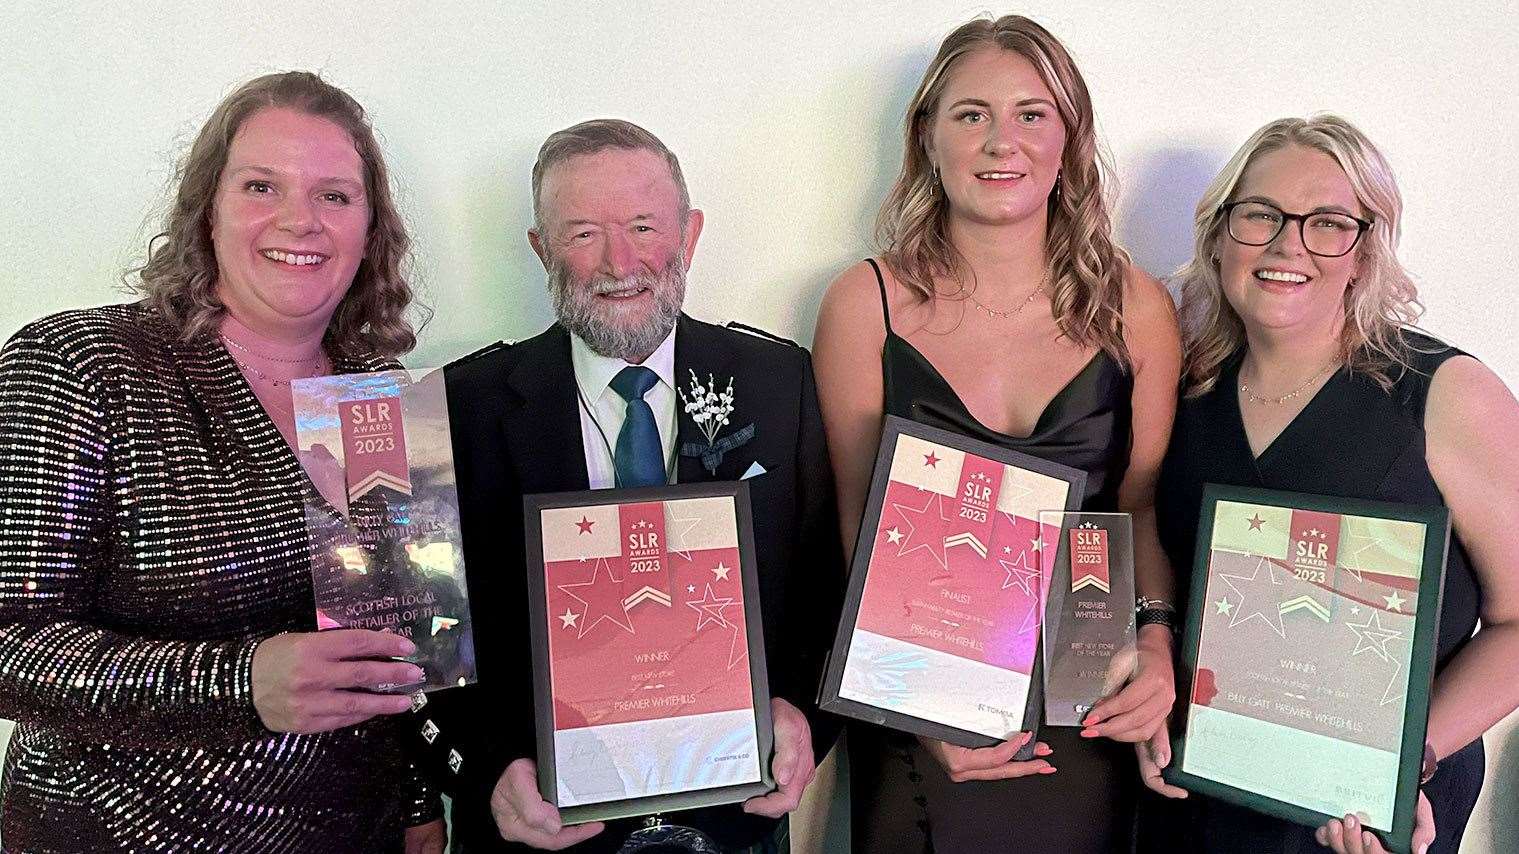 The Whitehills Premier staff with their awards (from left) are: Gemma Law, Johnny Stephen, Bethany Gatt and Kelsey Craib.